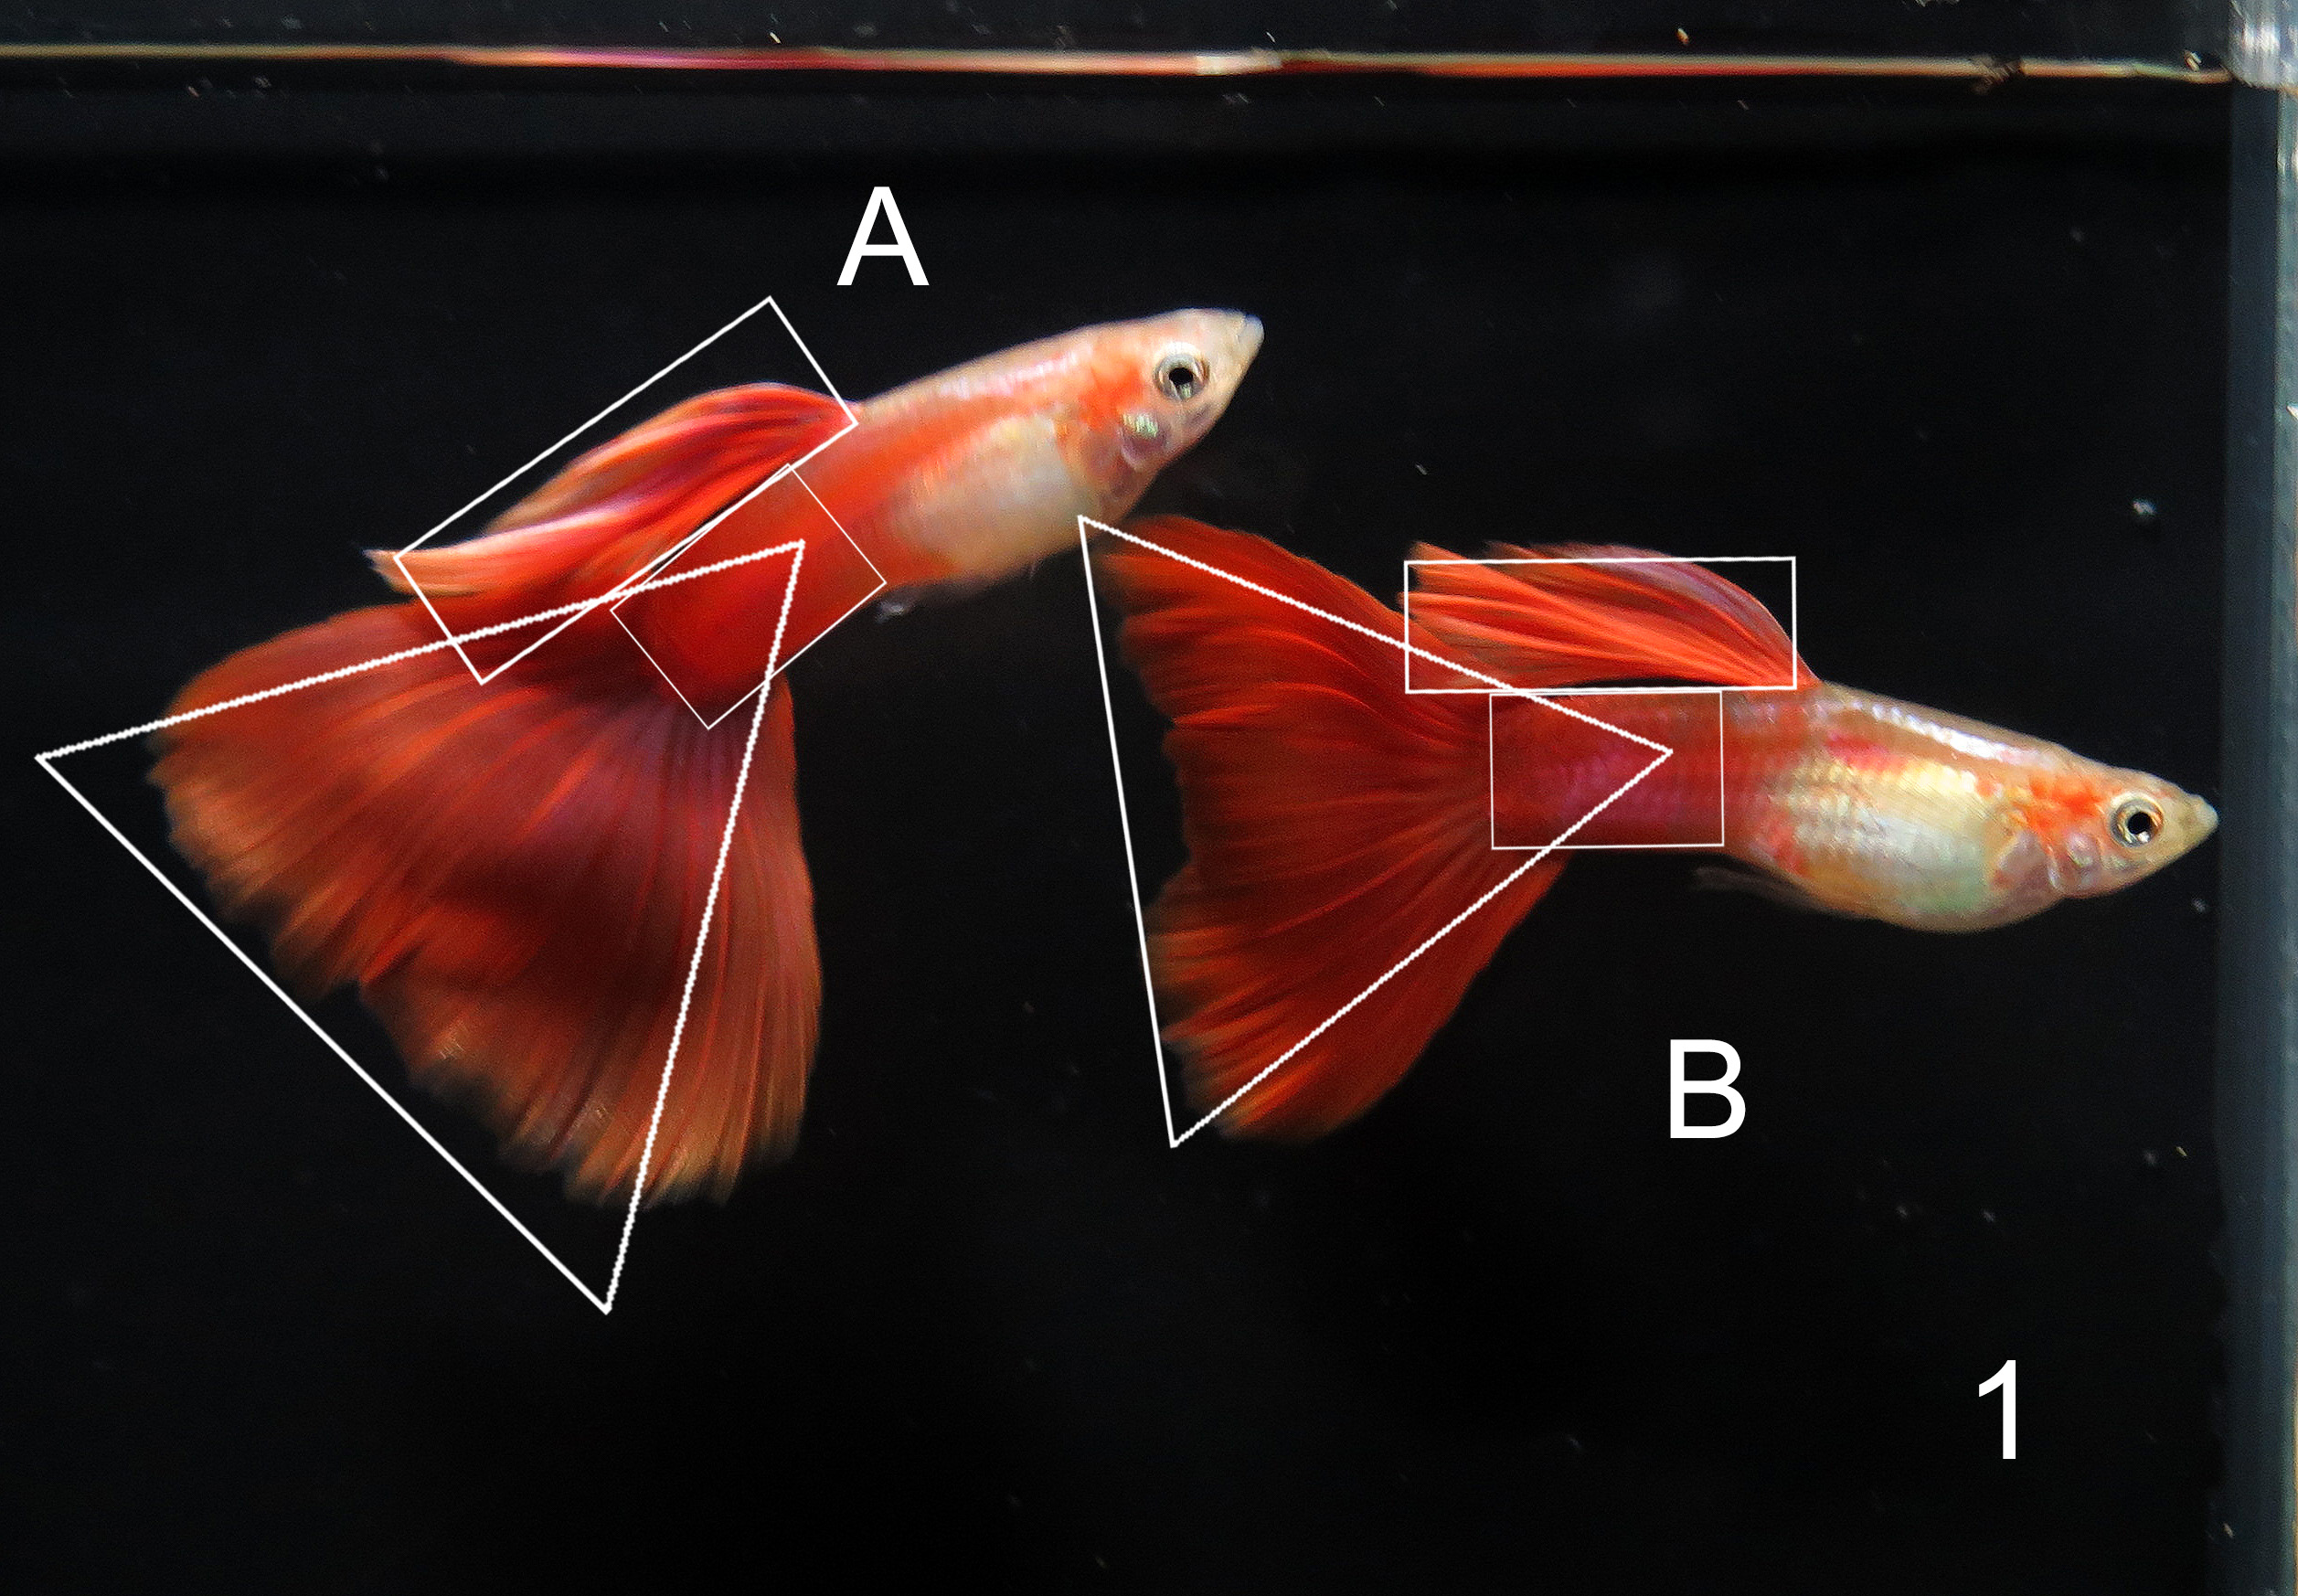 Red guppy tank entry shape judging